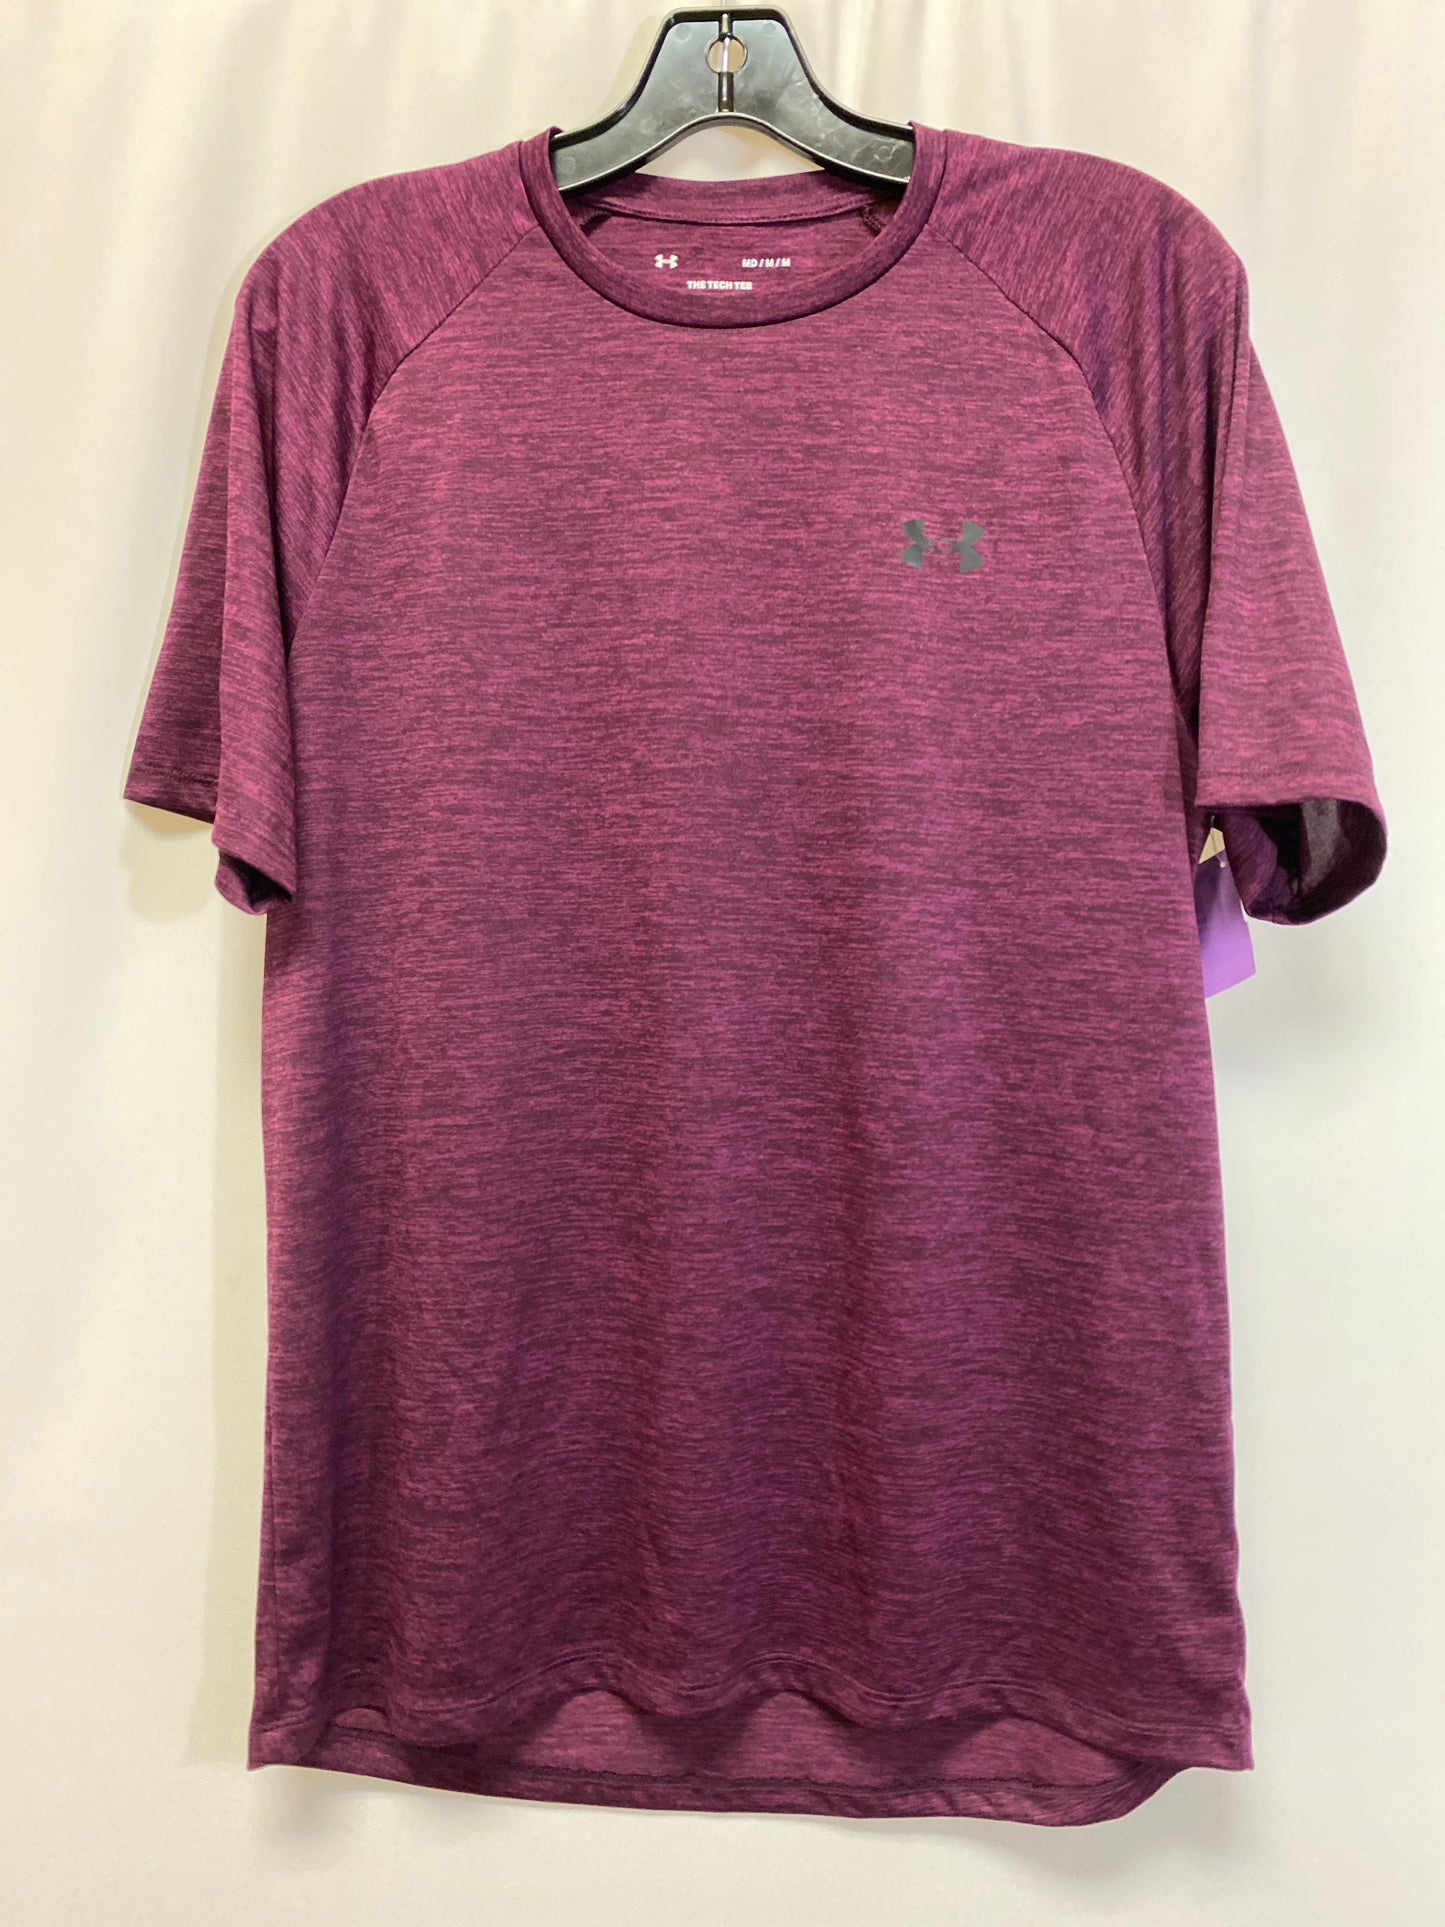 Purple Athletic Top Short Sleeve Under Armour, Size M